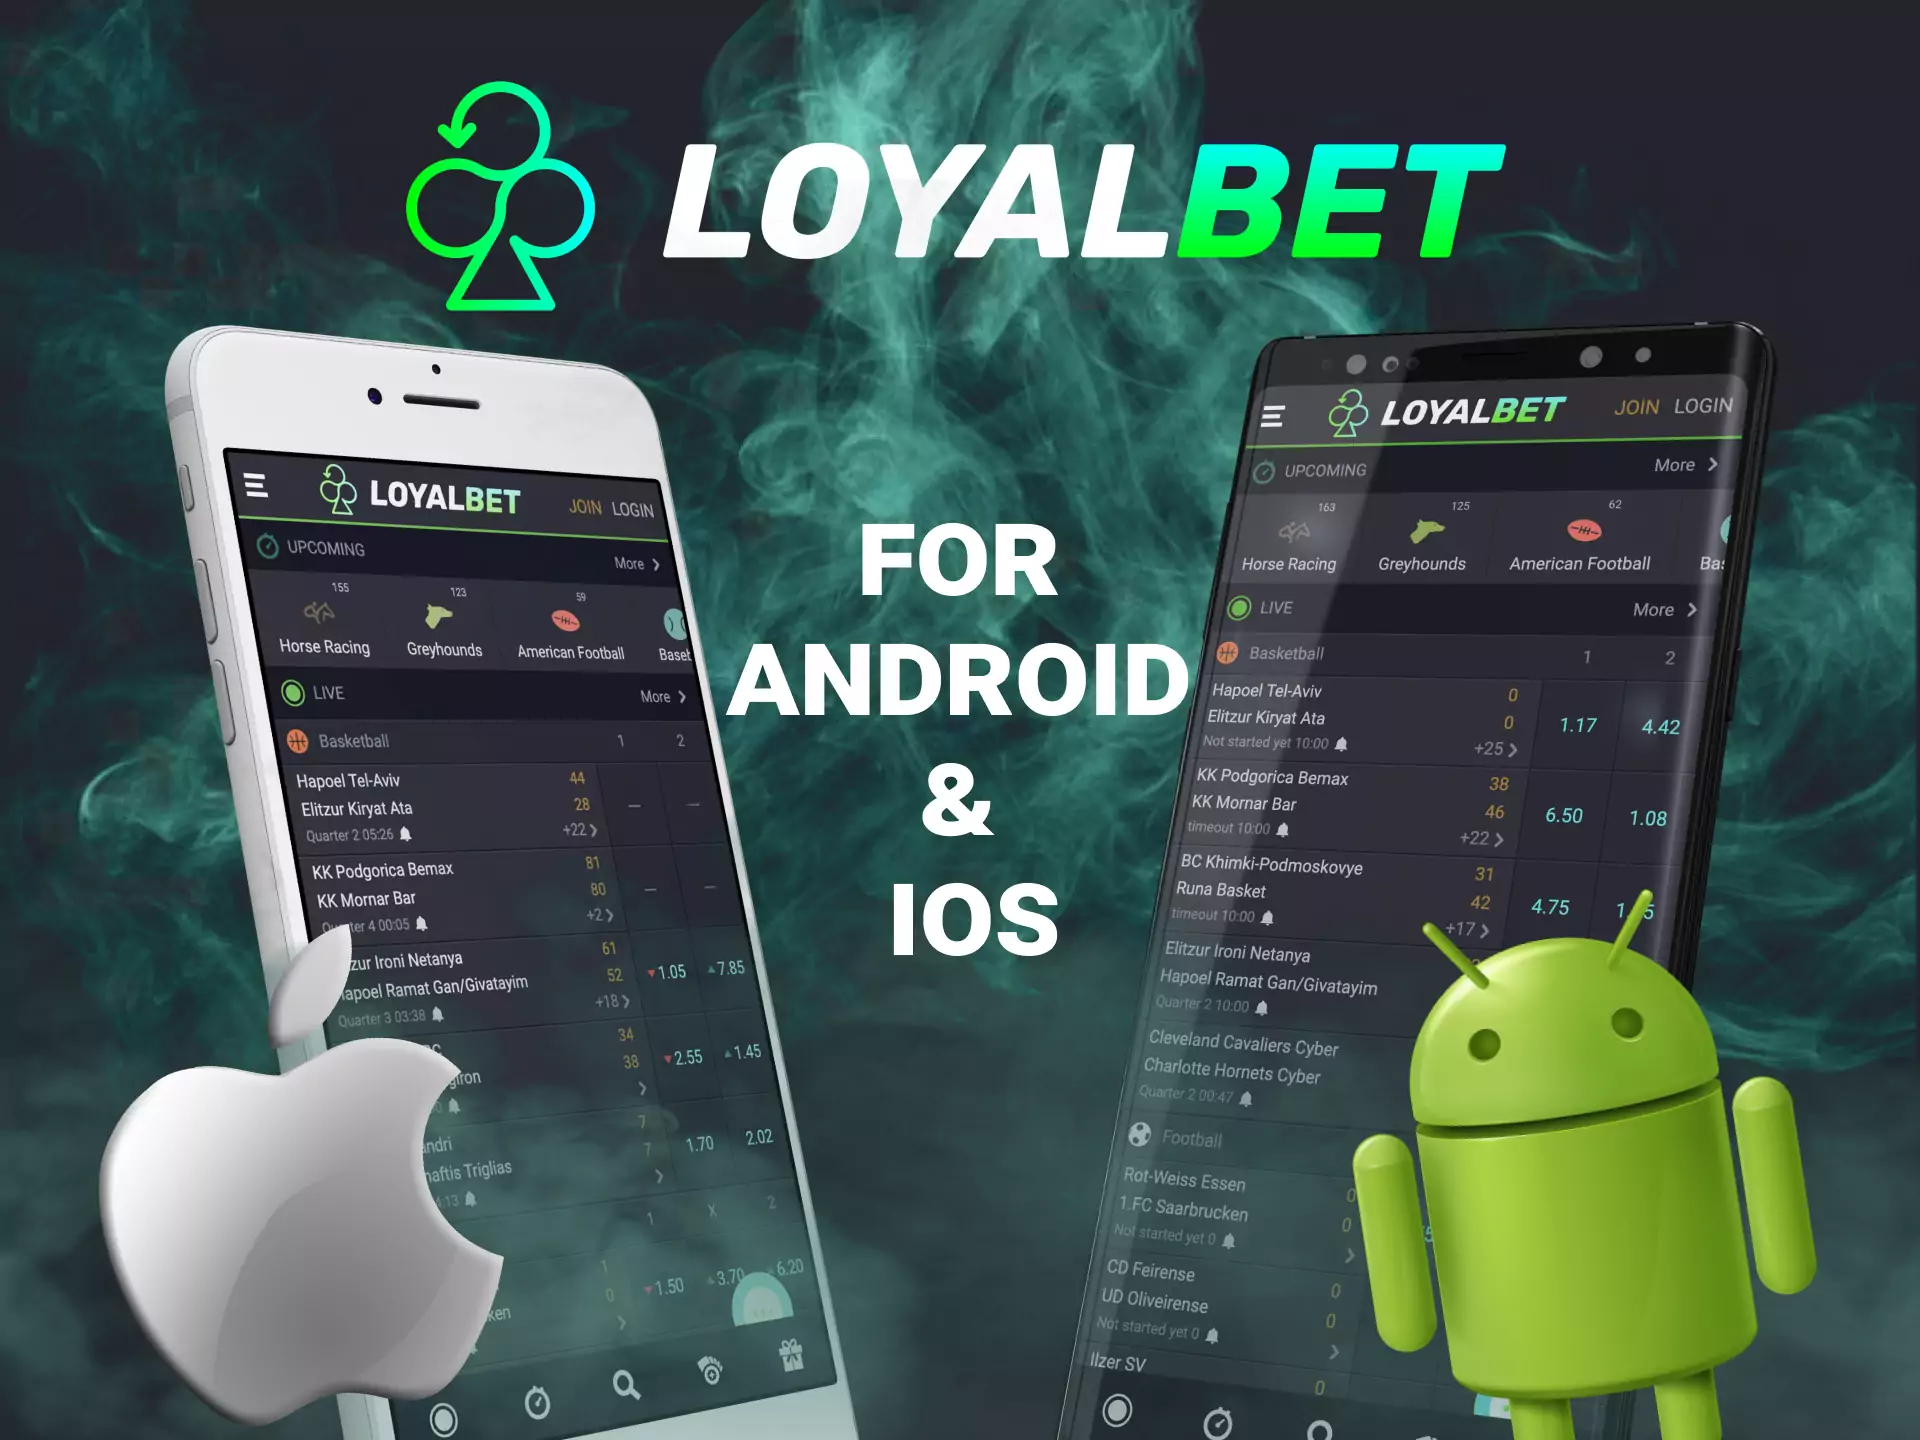 Loyalbet mobile website works great on Android and iOS.